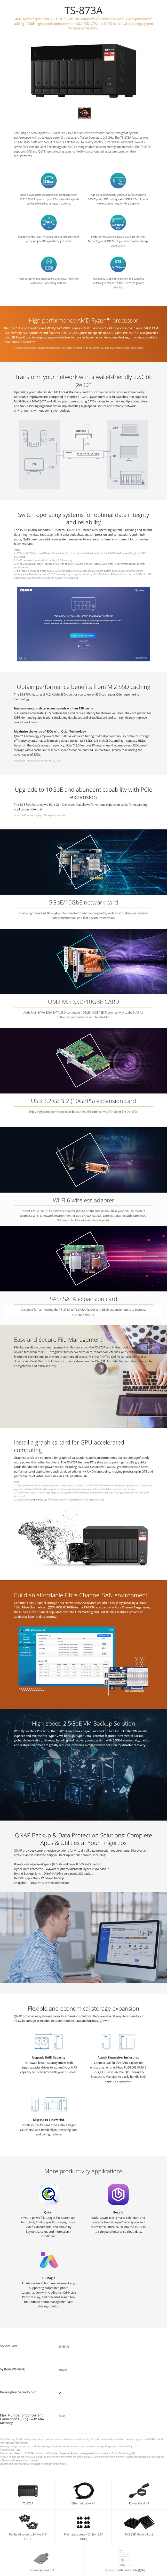 A large marketing image providing additional information about the product QNAP TS-873A 2.2GHz 8GB 8-Bay NAS Enclosure - Additional alt info not provided